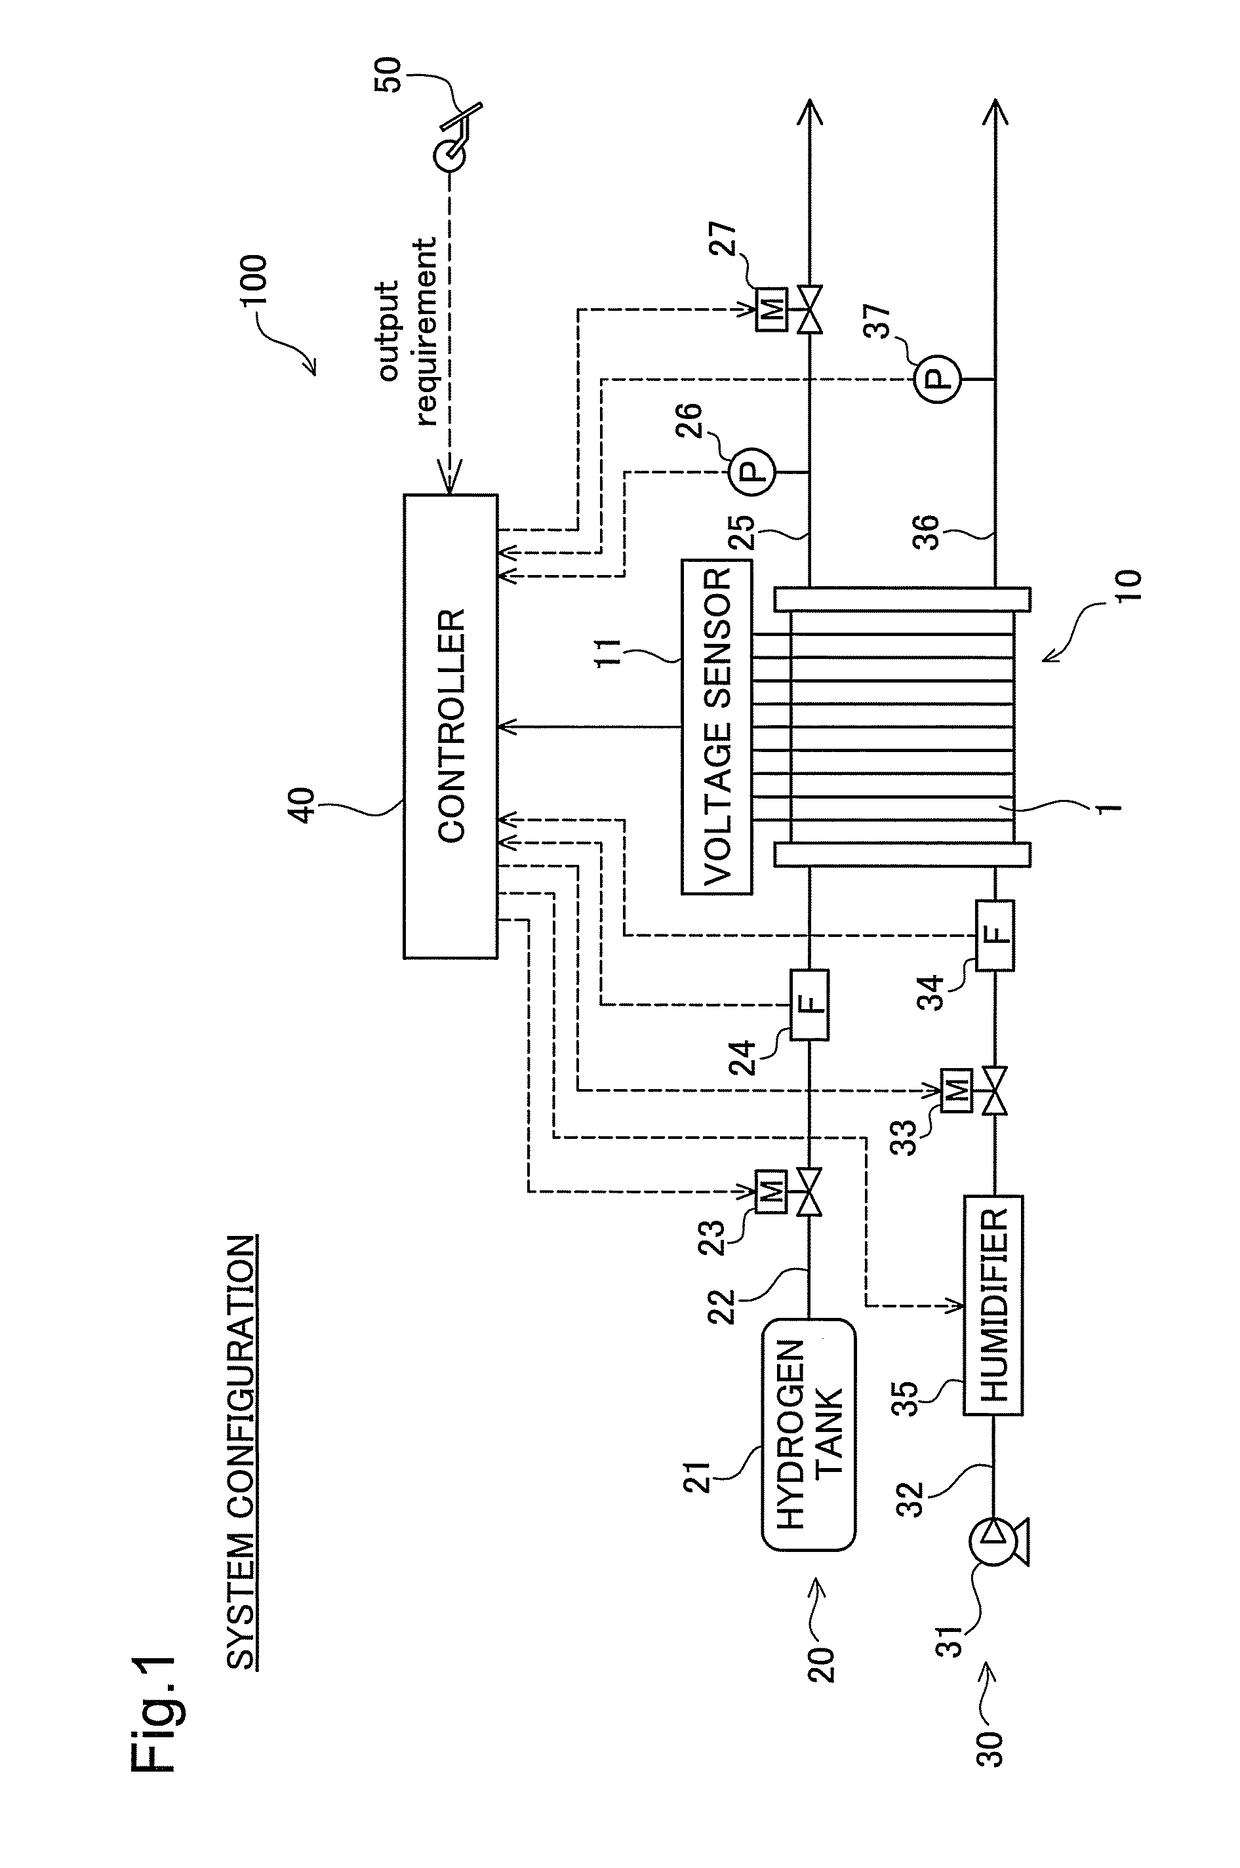 Fuel cell system and method of controlling the same